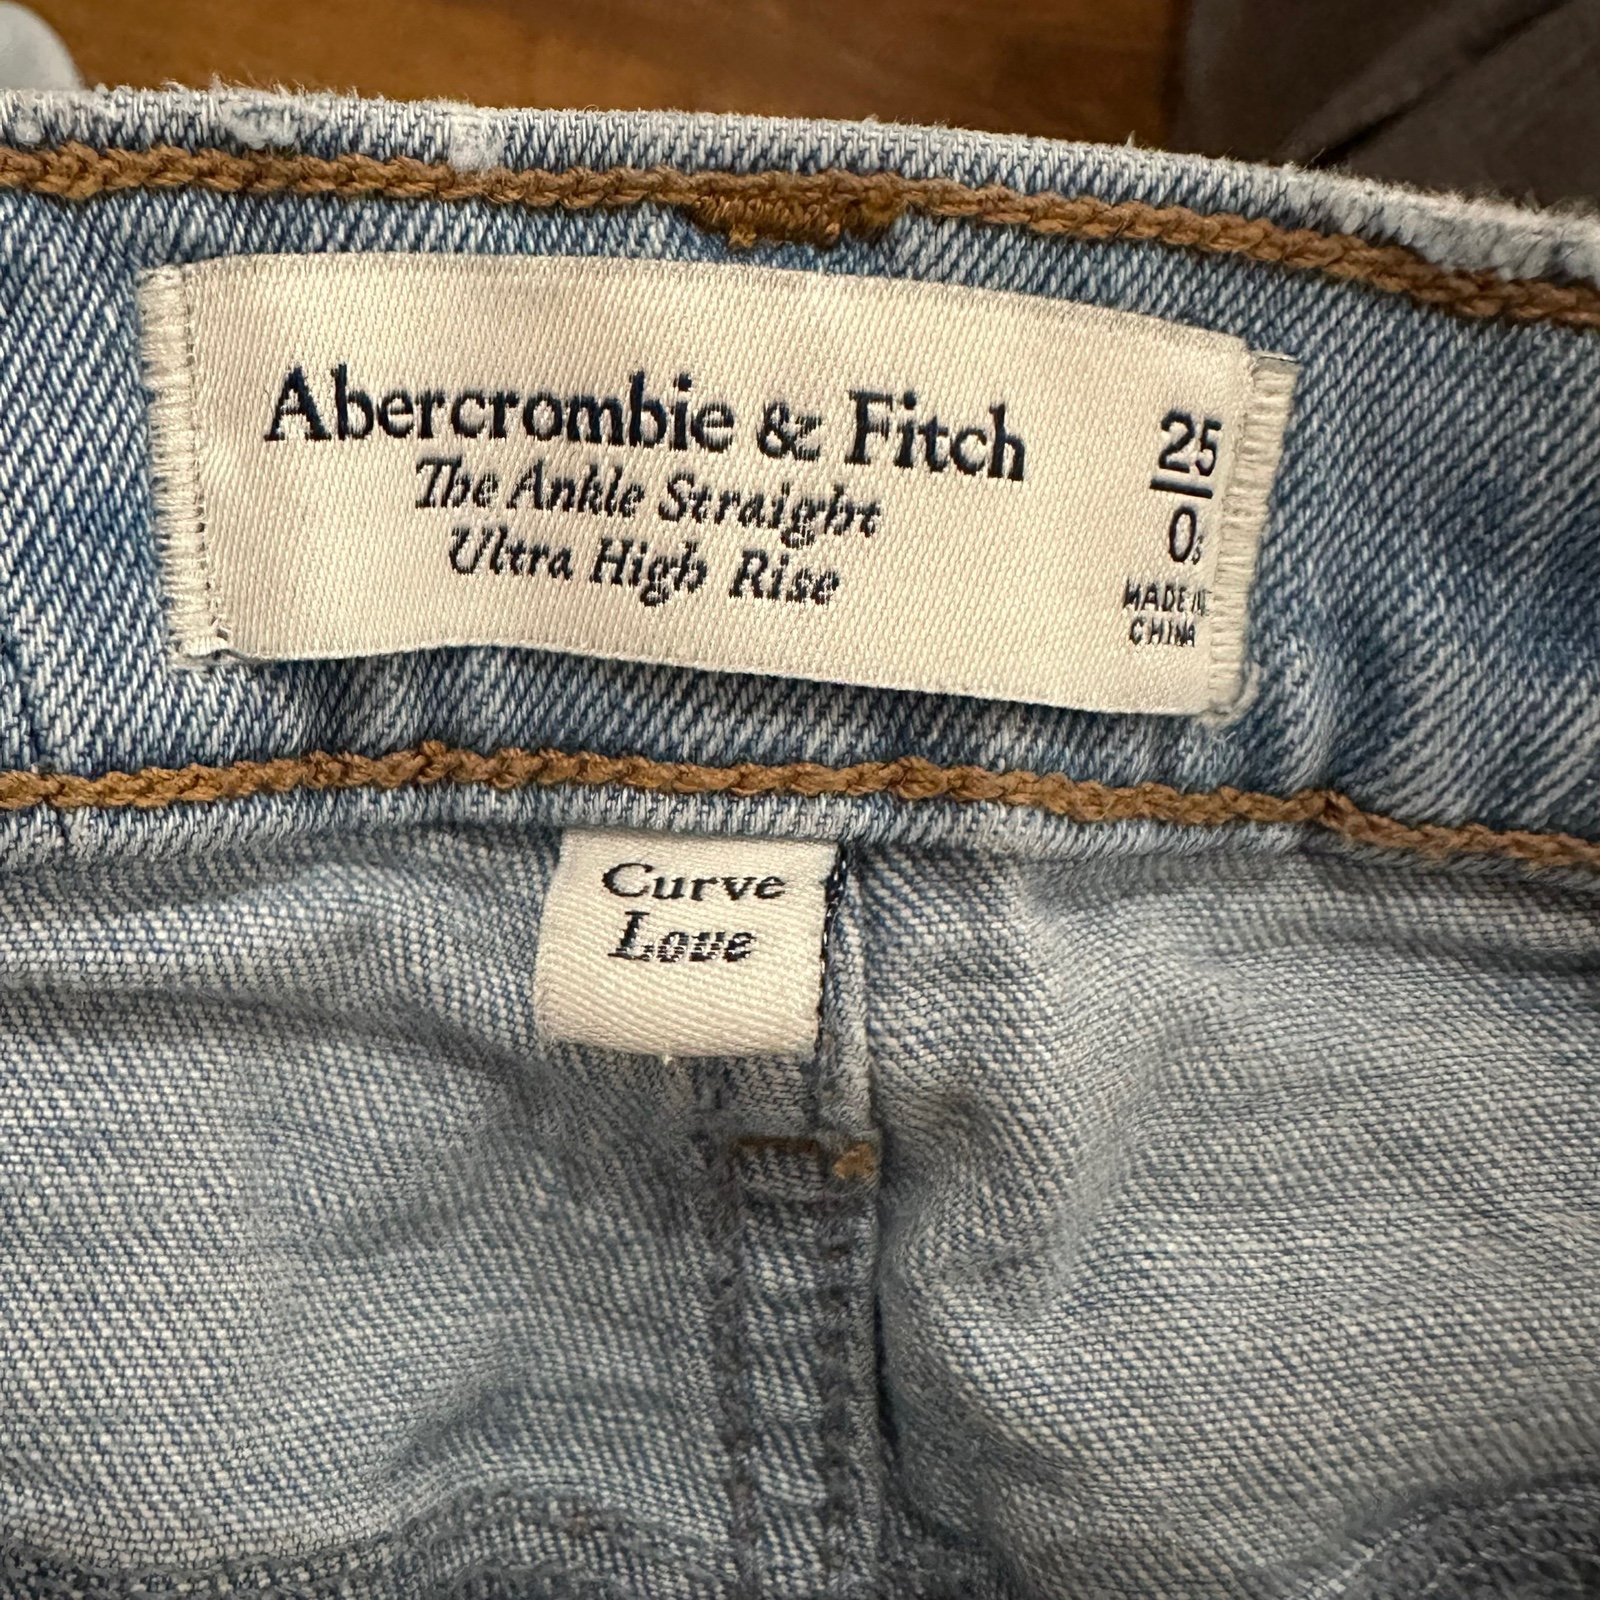 Comfortable Abercrombie & Fitch Curve Love Ultra High Rise Jeans j9m2AuPul just buy it